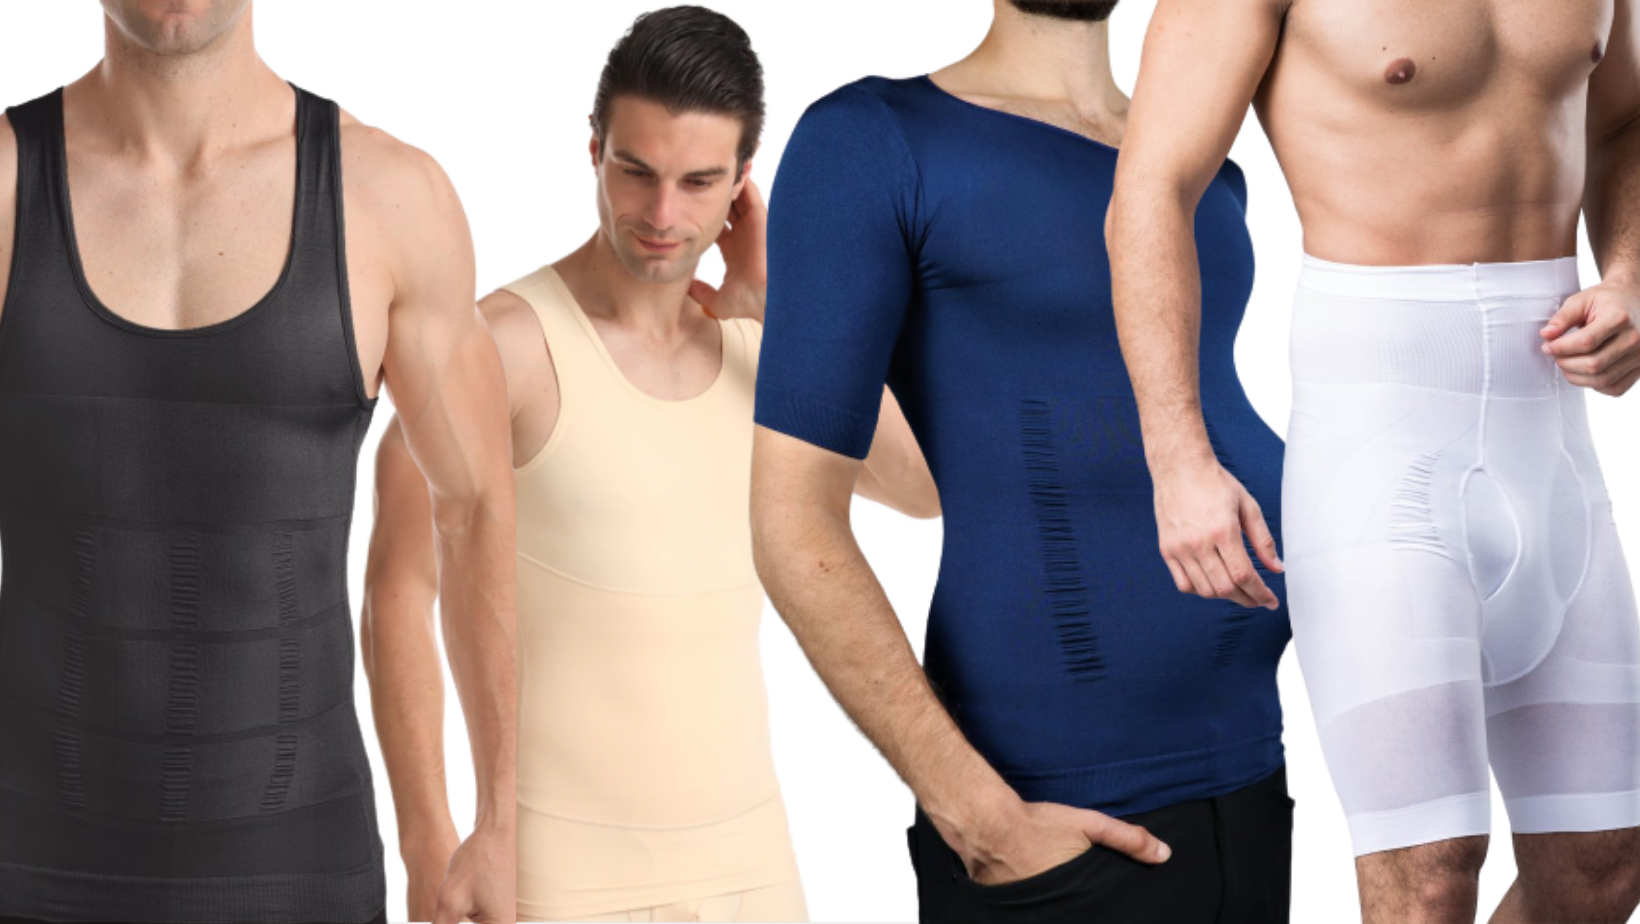 shapers, body shapers, slimming undershirts, slimming shorts